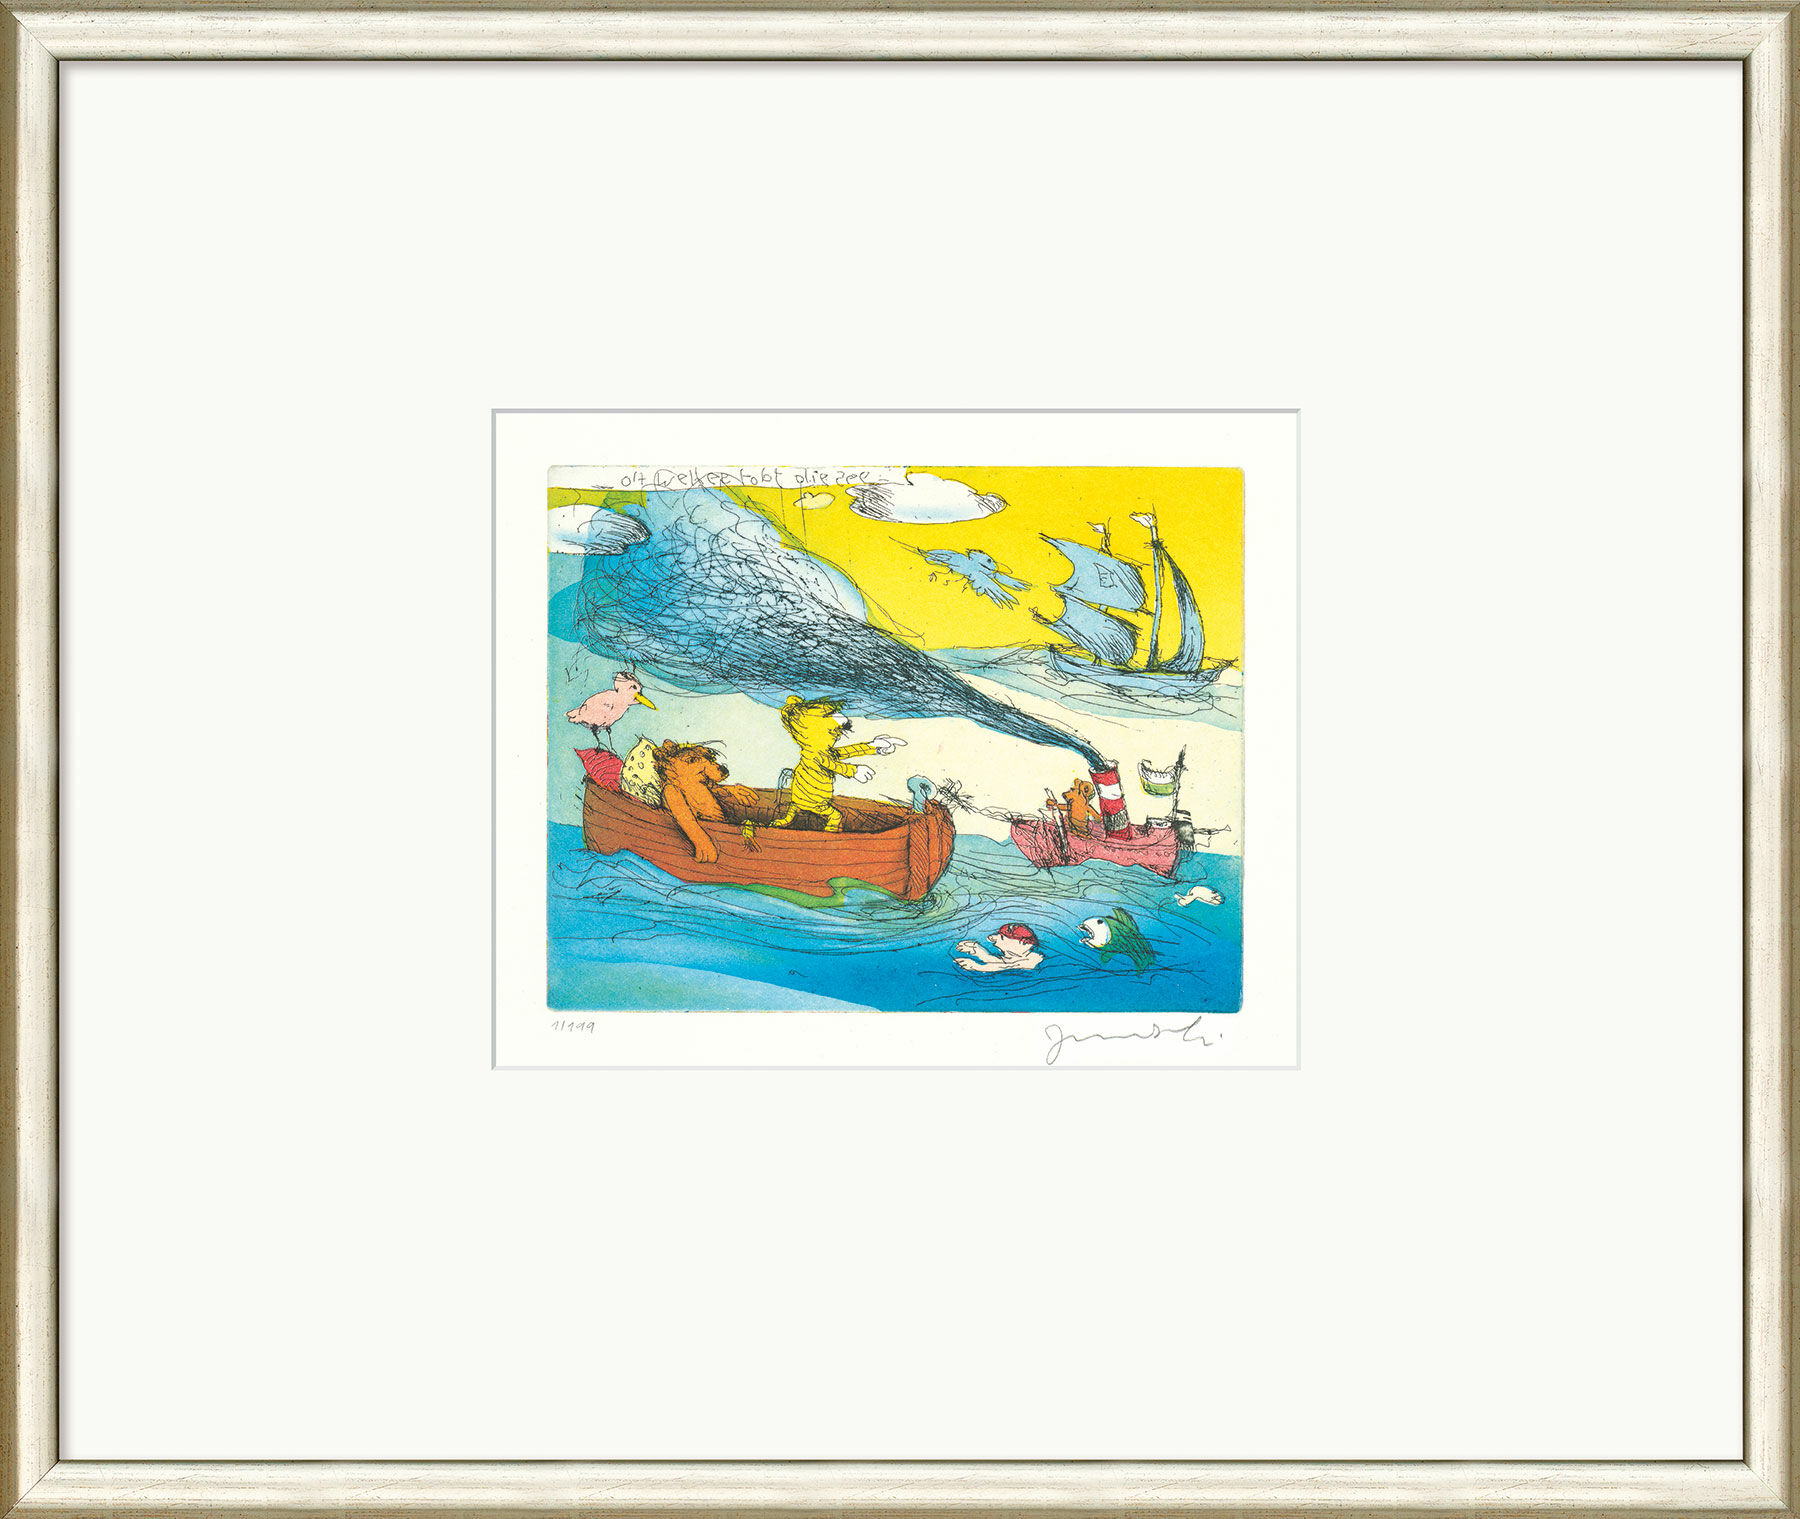 Picture "Oh Dear, the Sea is Raging", framed by Janosch